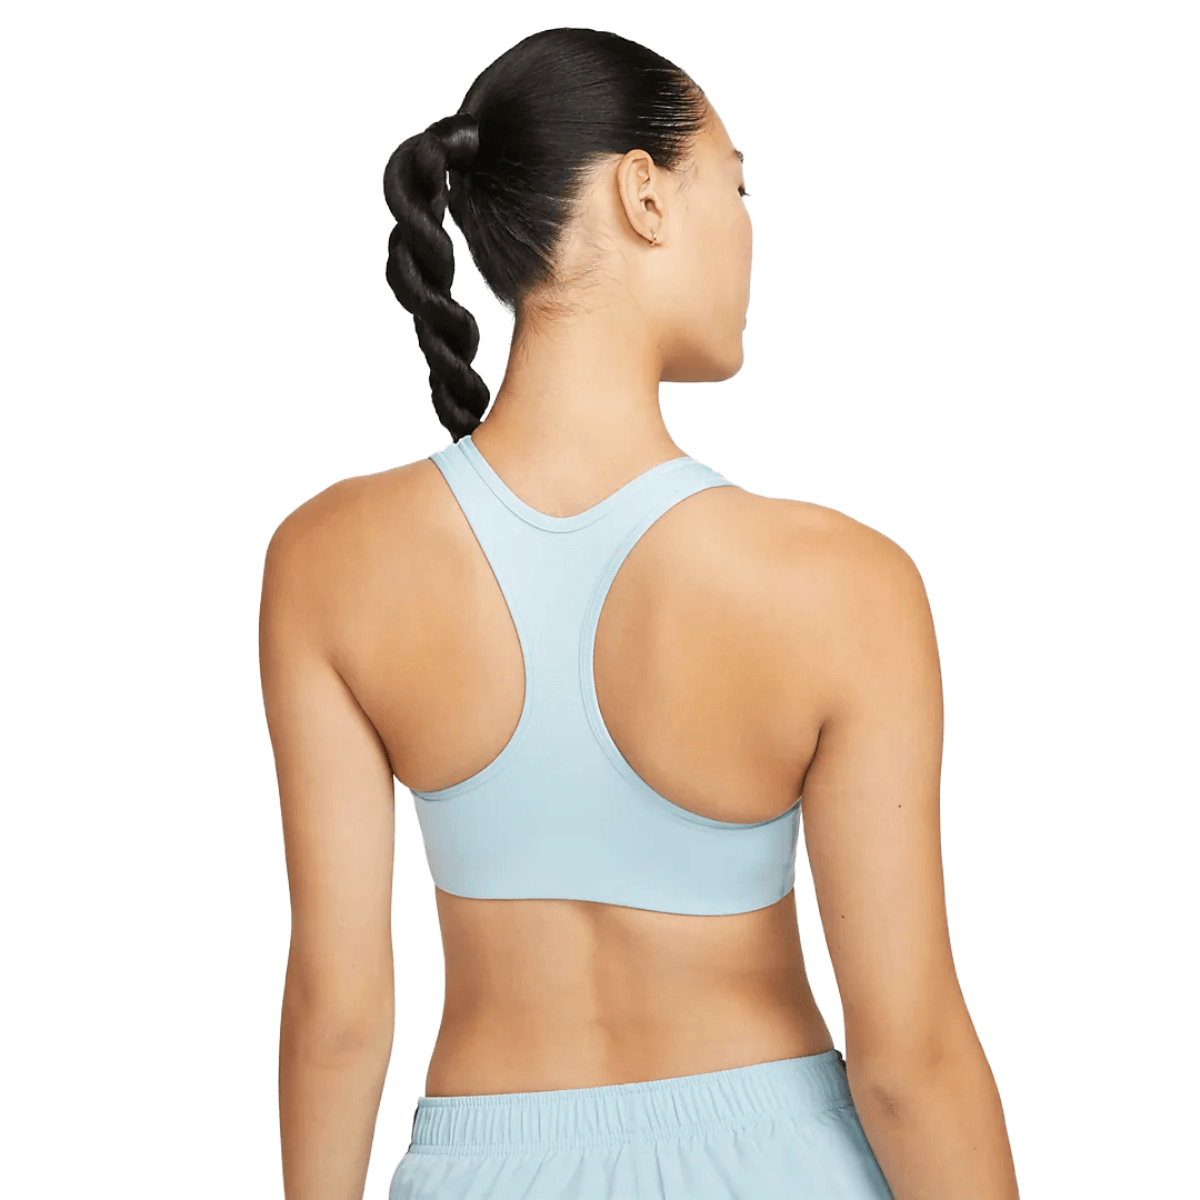 Patagonia Women's Wild Trails Sports Bra - Recycled Polyester